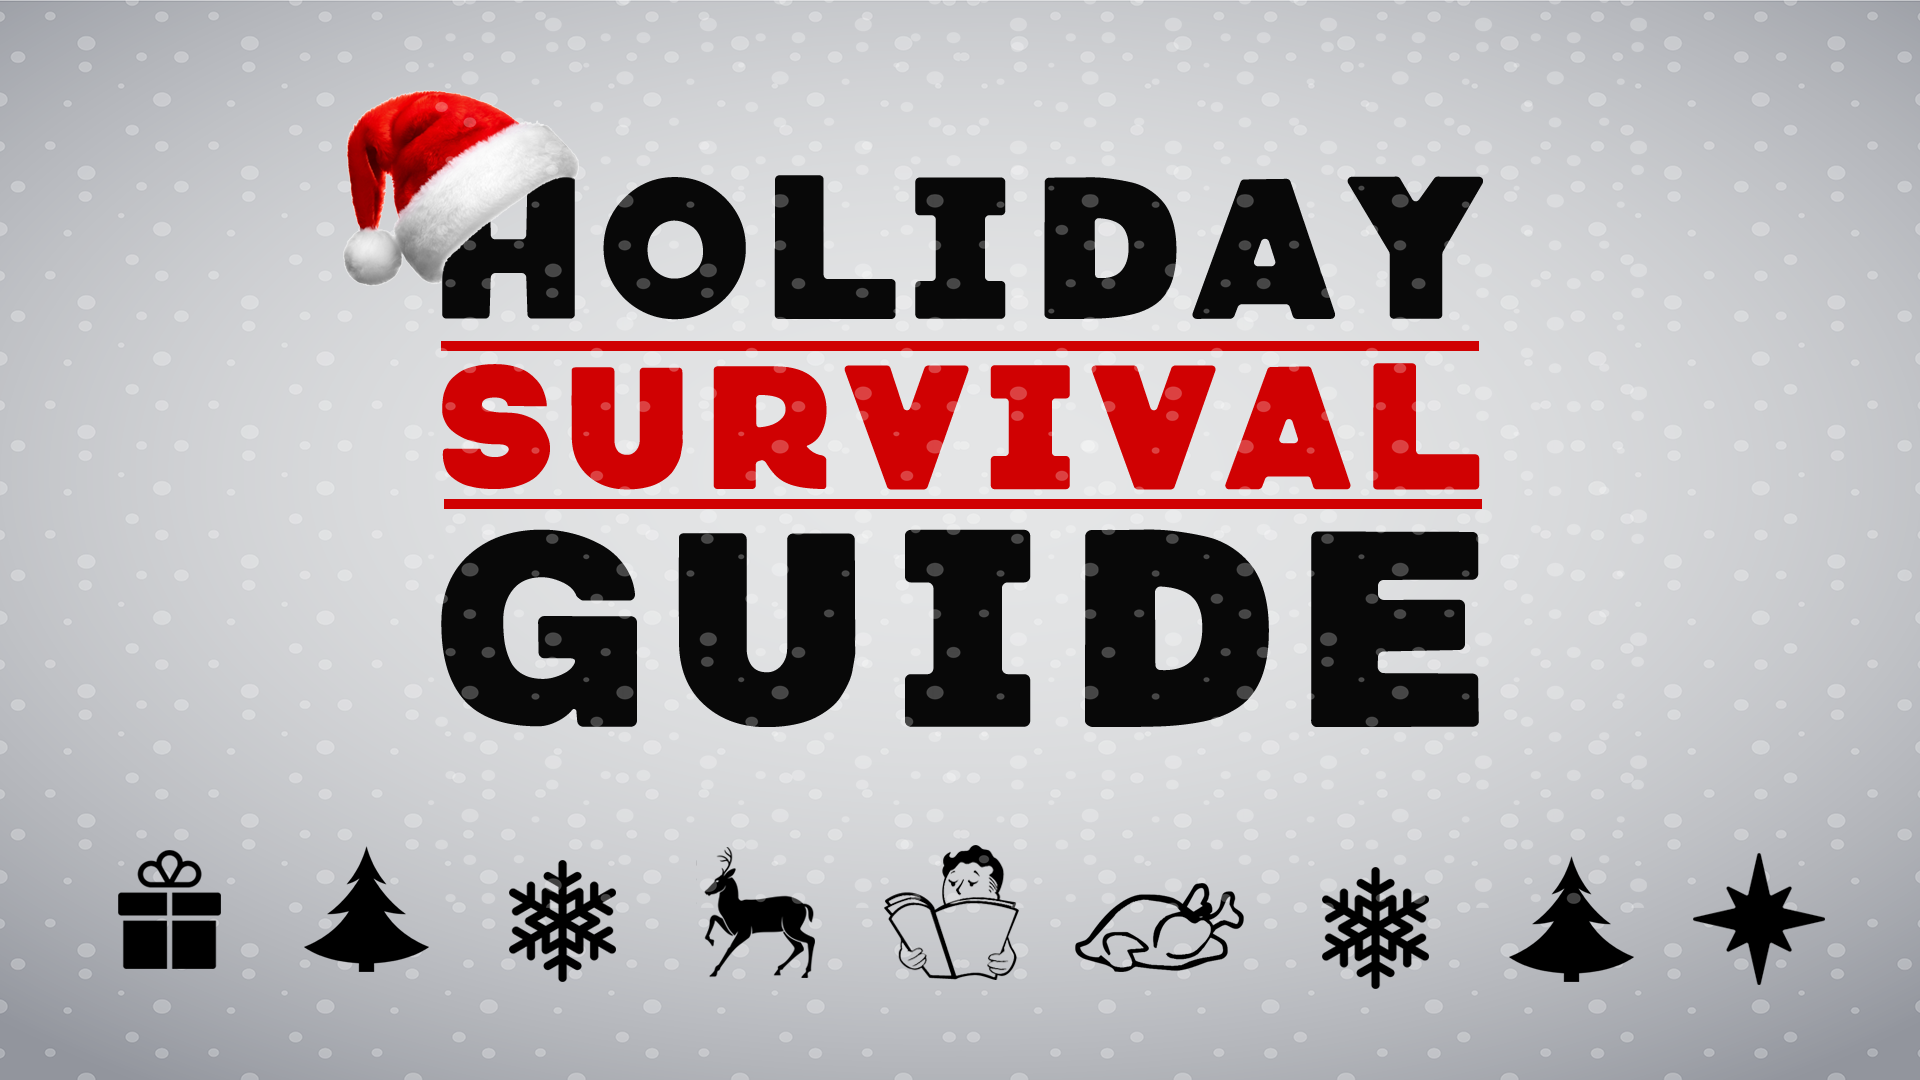 HOLIDAY SURVIVAL GUIDE_3.png